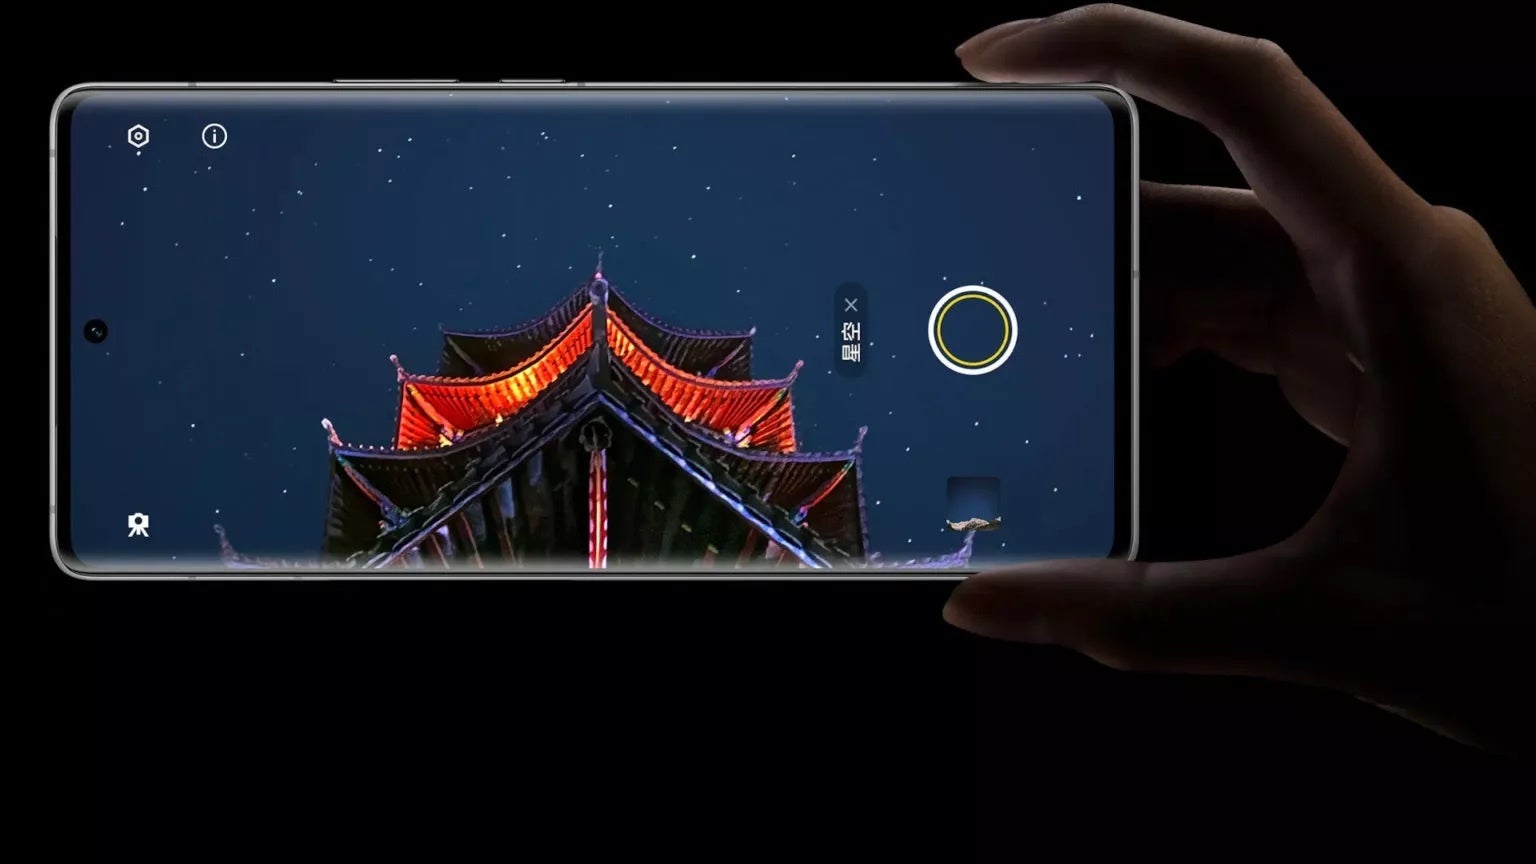 (Image Credit - Vivo) Handheld astrophotography on the Vivo X90 Pro Plus - Disruptive camera phone that promises to beat iPhone and Galaxy now official: meet Vivo X90 Pro Plus